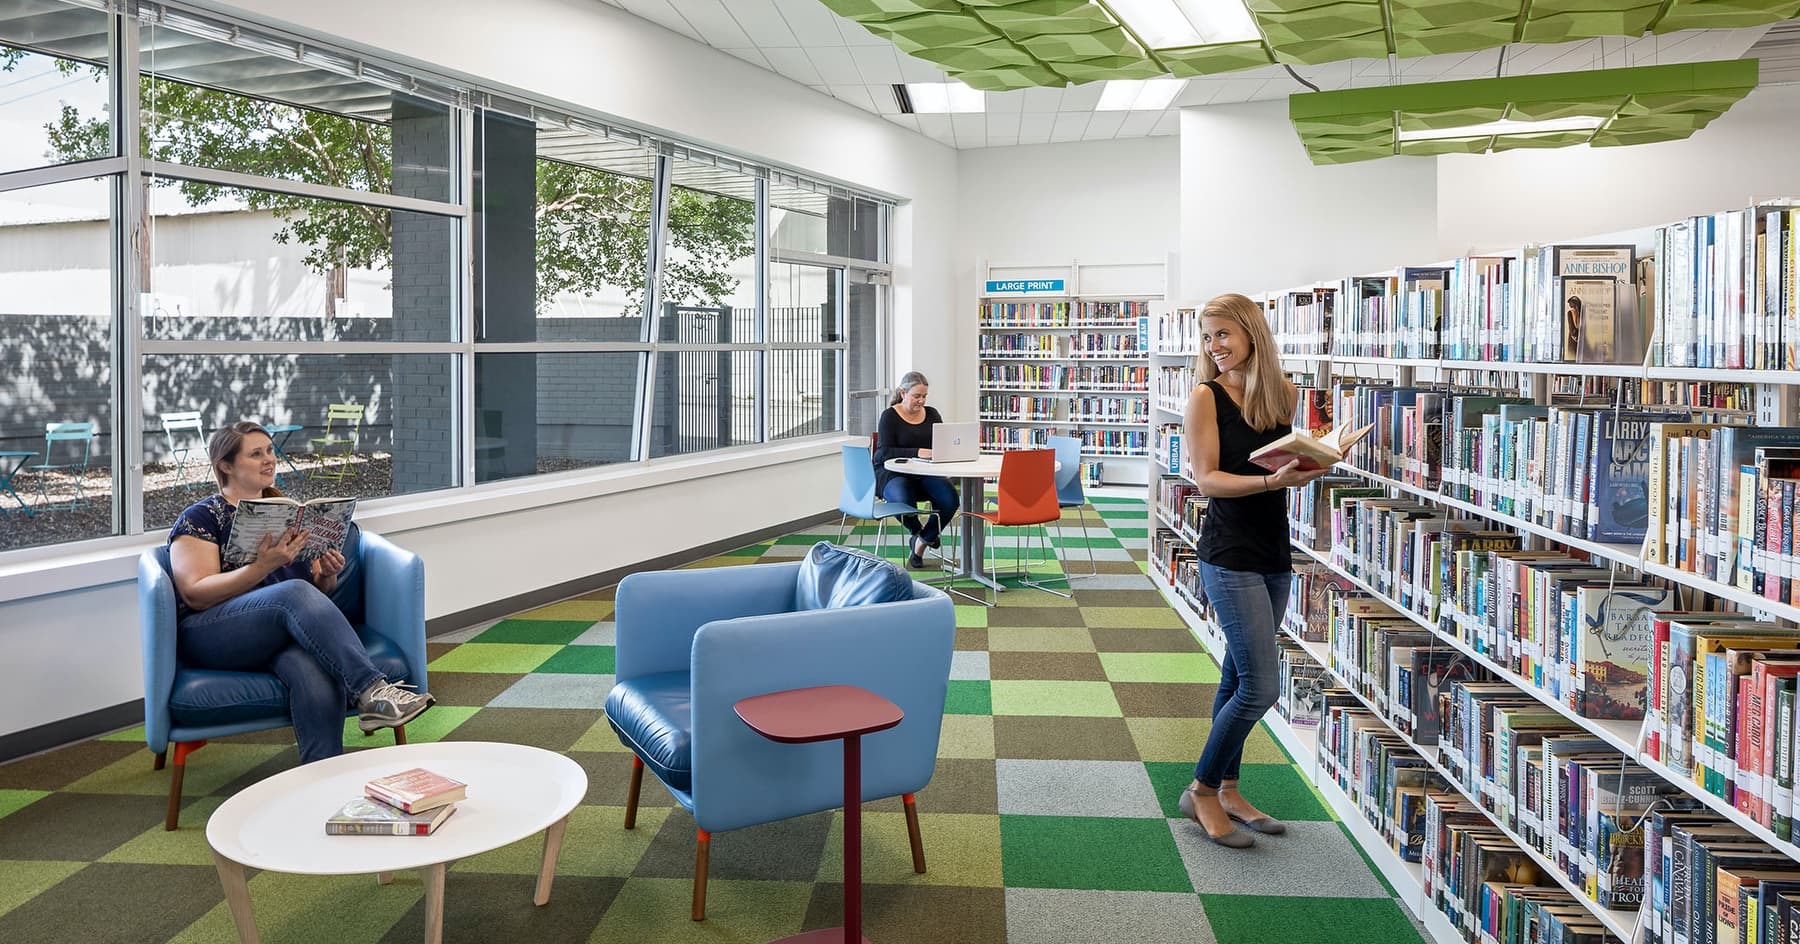 Bringing the outdoors inside, architect Boudreaux designed a light filled space for the Southeast branch